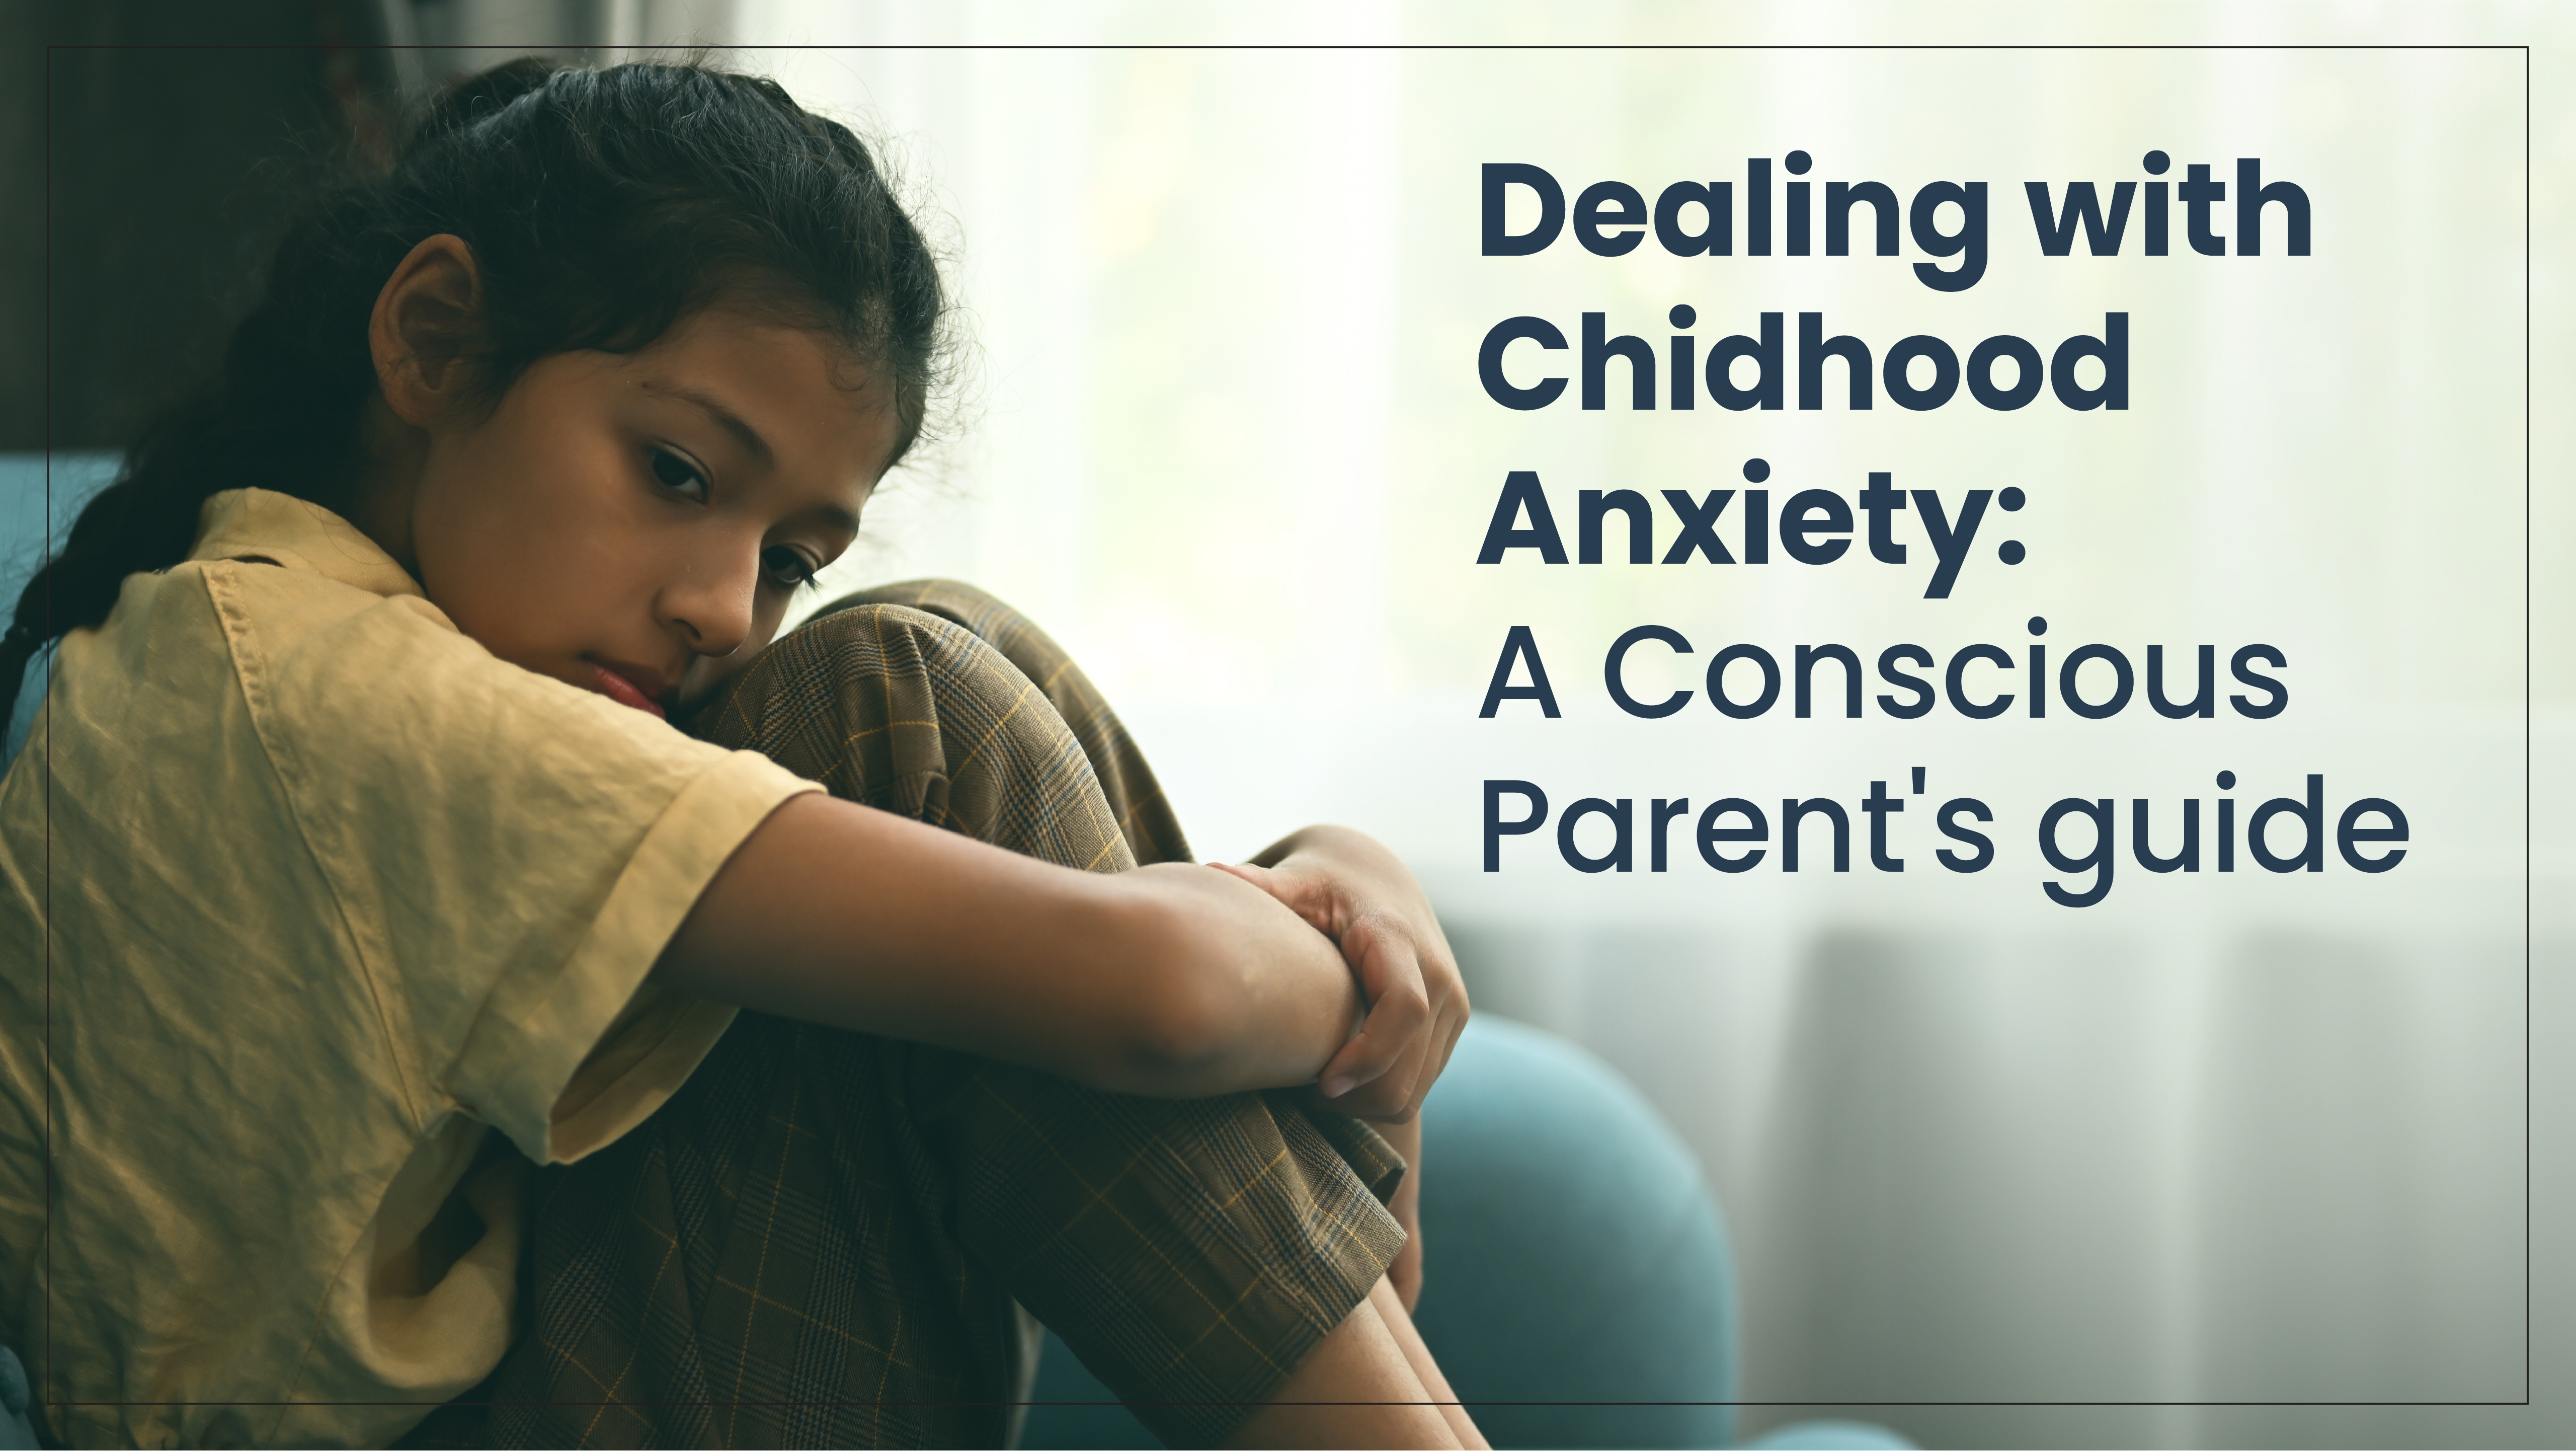 Dealing with Childhood Anxiety: A Conscious Parent’s Guide